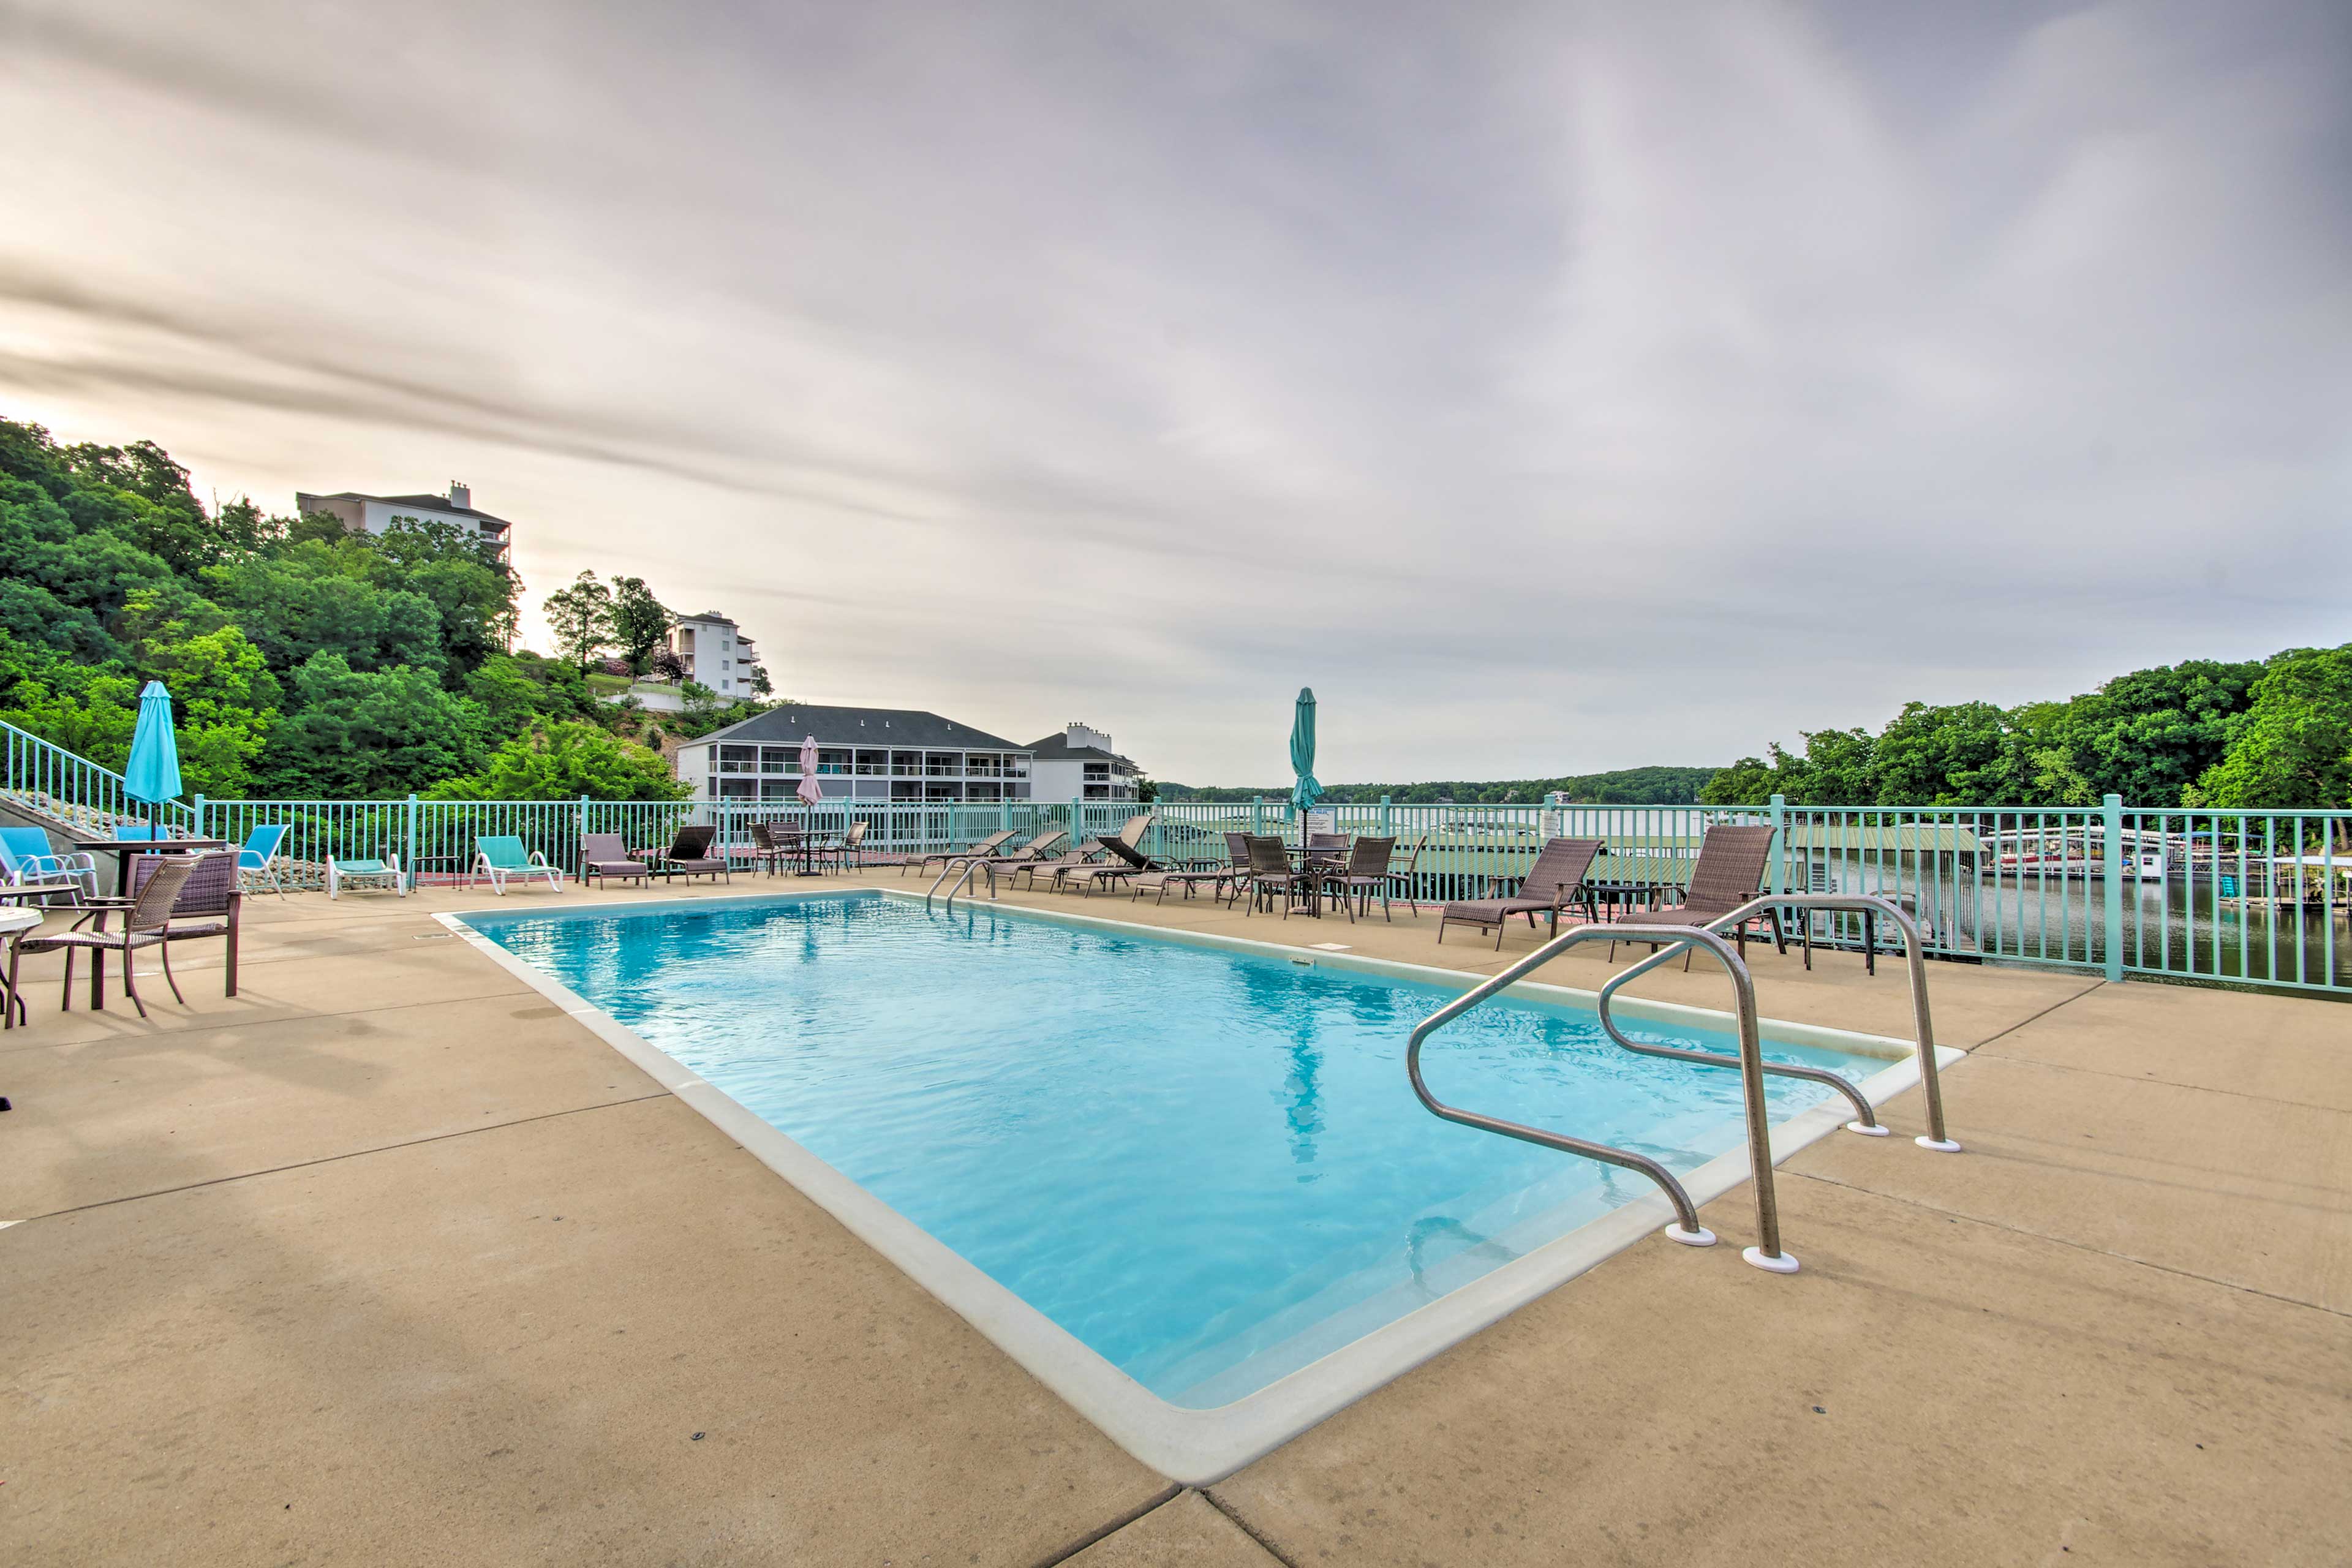 Access to Community Seasonal Outdoor Pool | Rentable Boat Dock Nearby